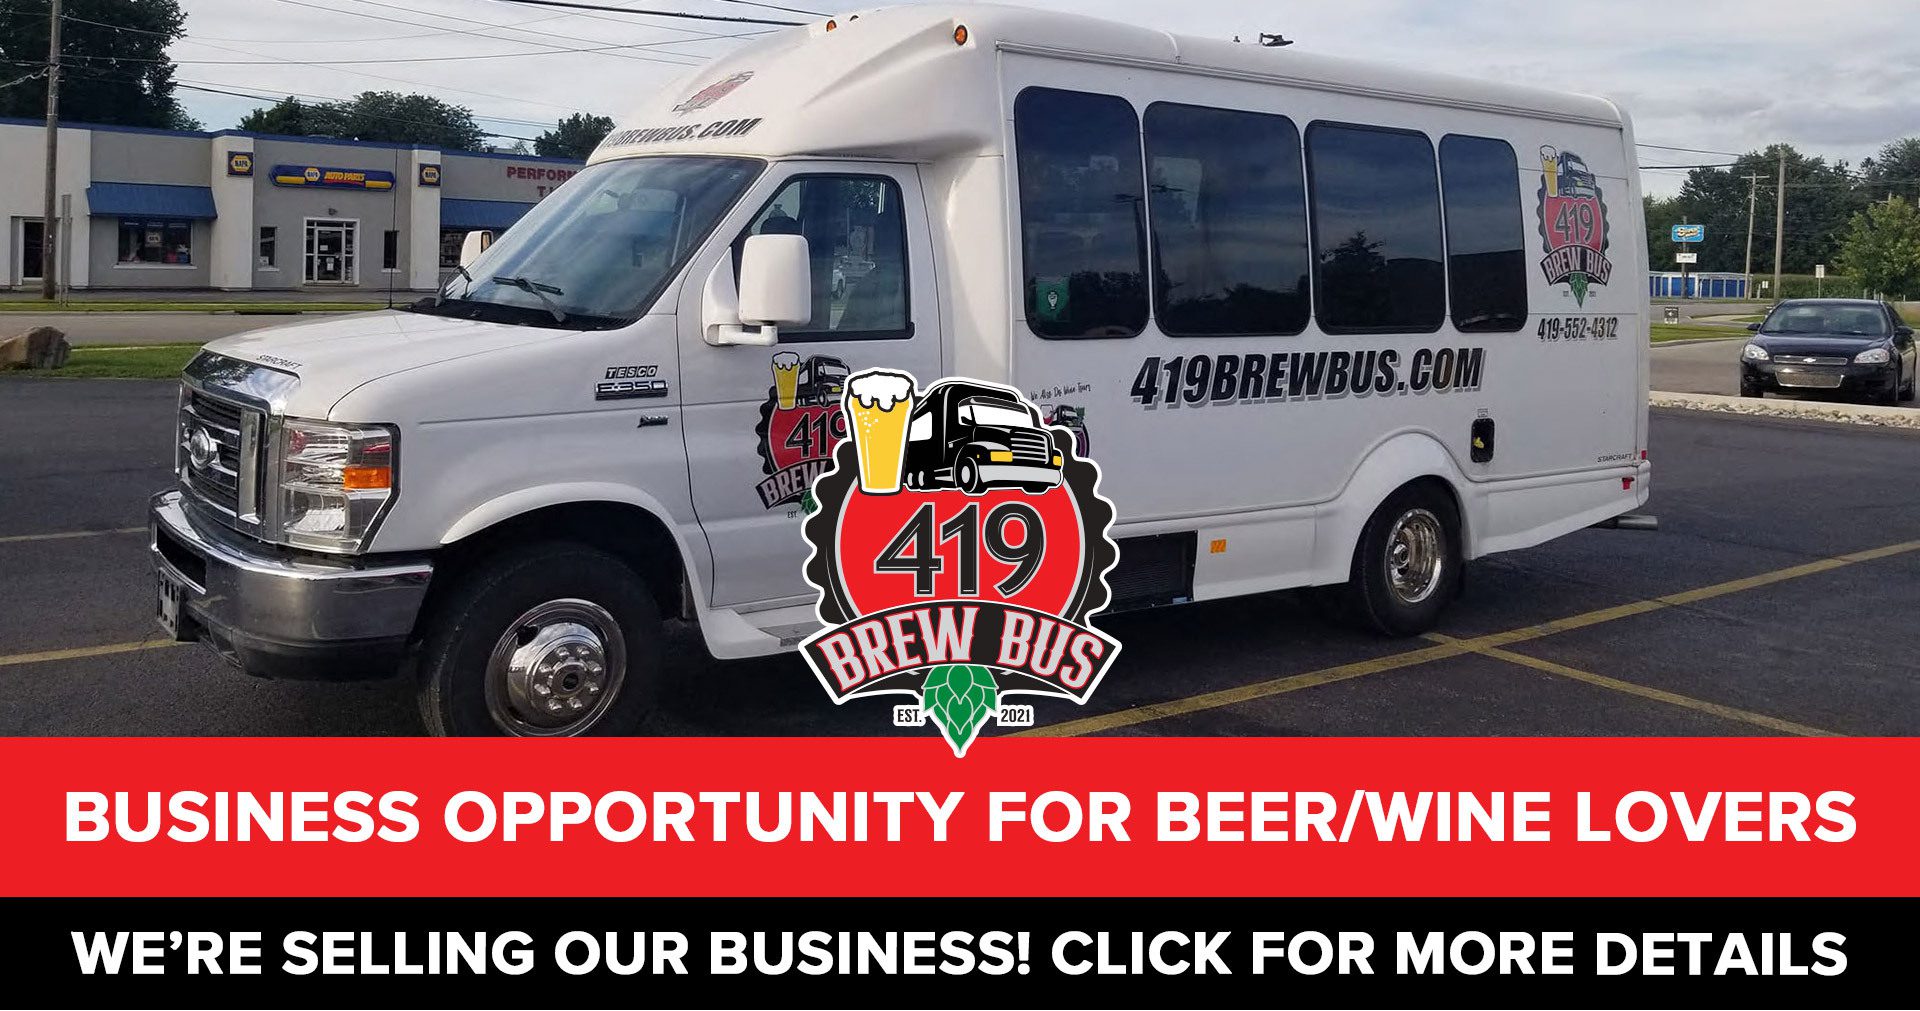 Business Opportunity for Beer lovers, we are selling our business